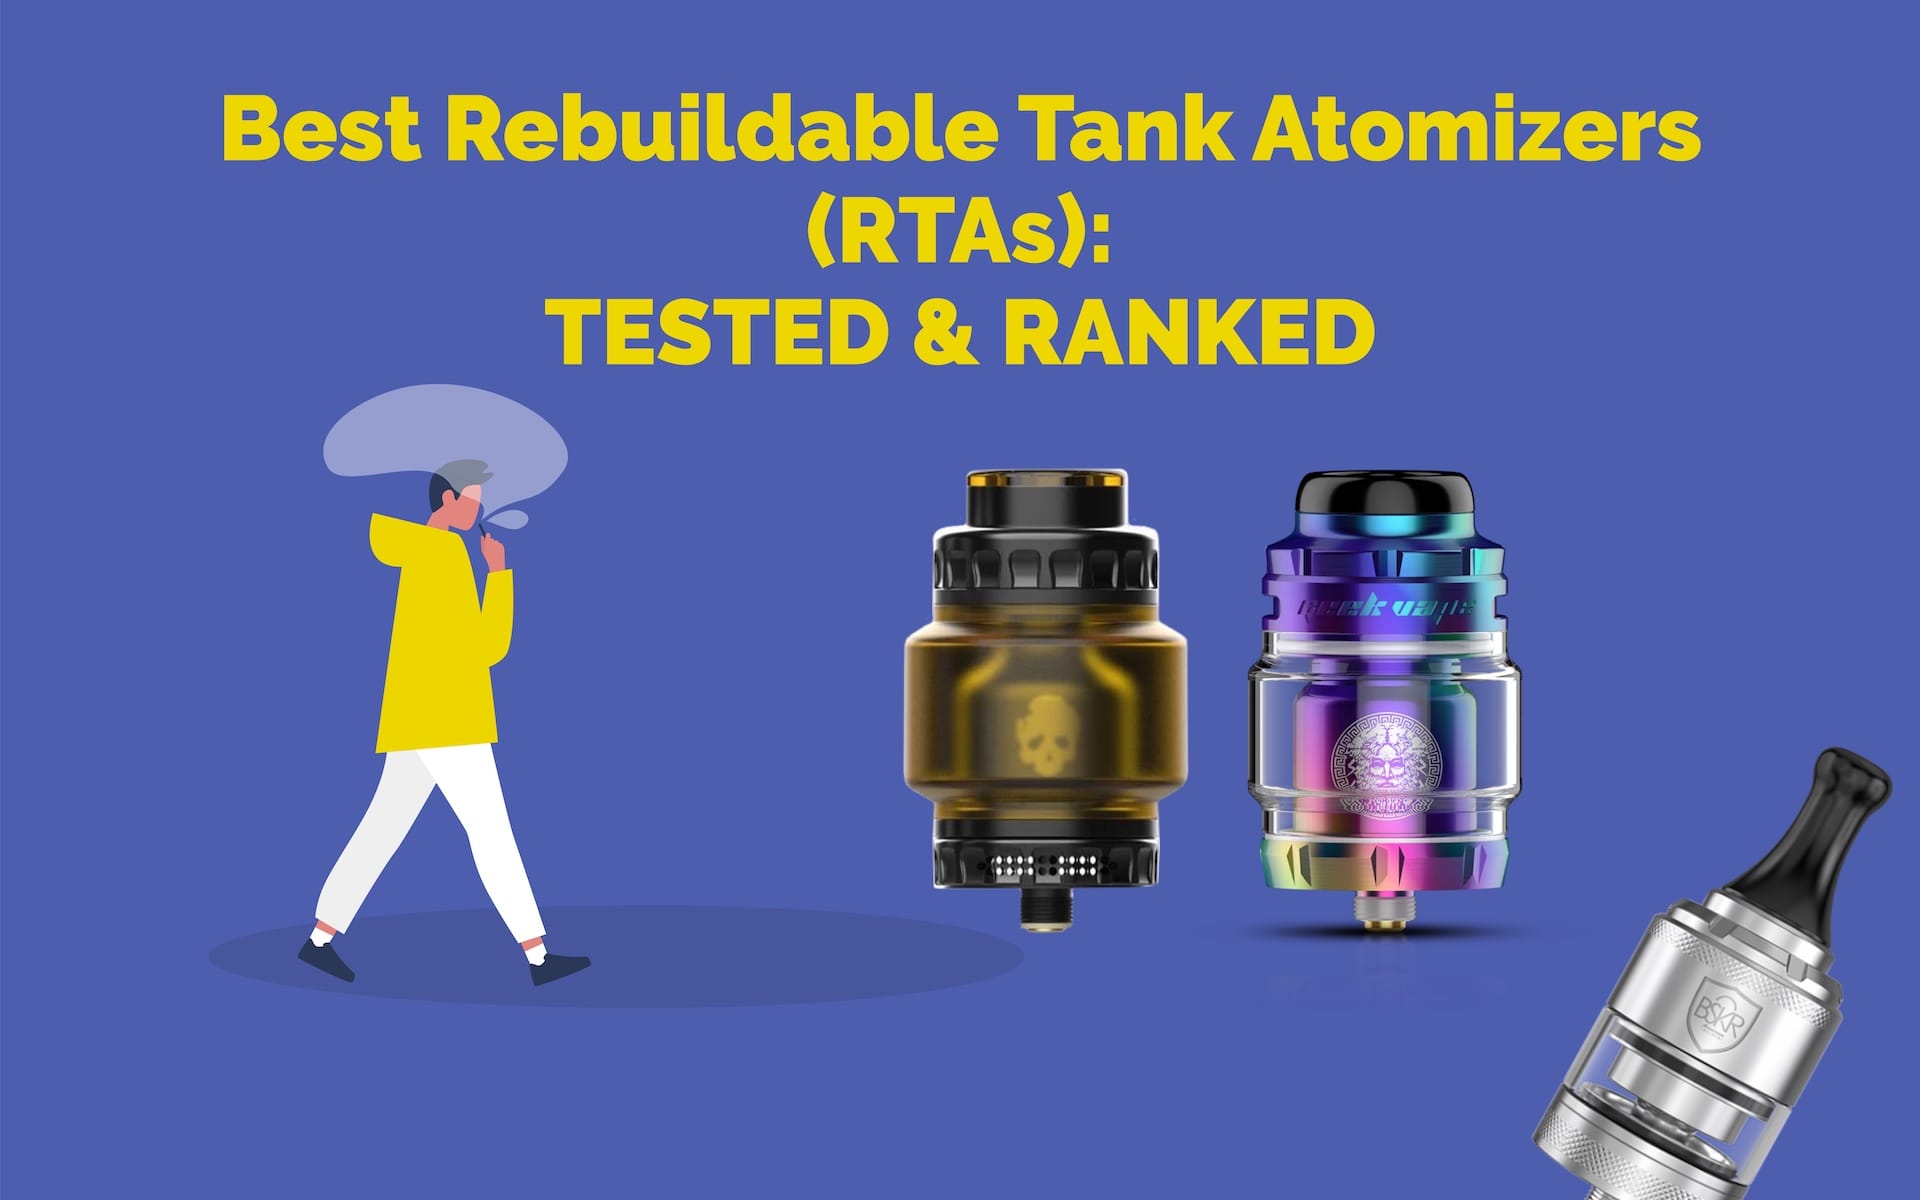 6 Best RTA Tanks for 2023 Top Tanks TESTED & RANKED by VS Experts